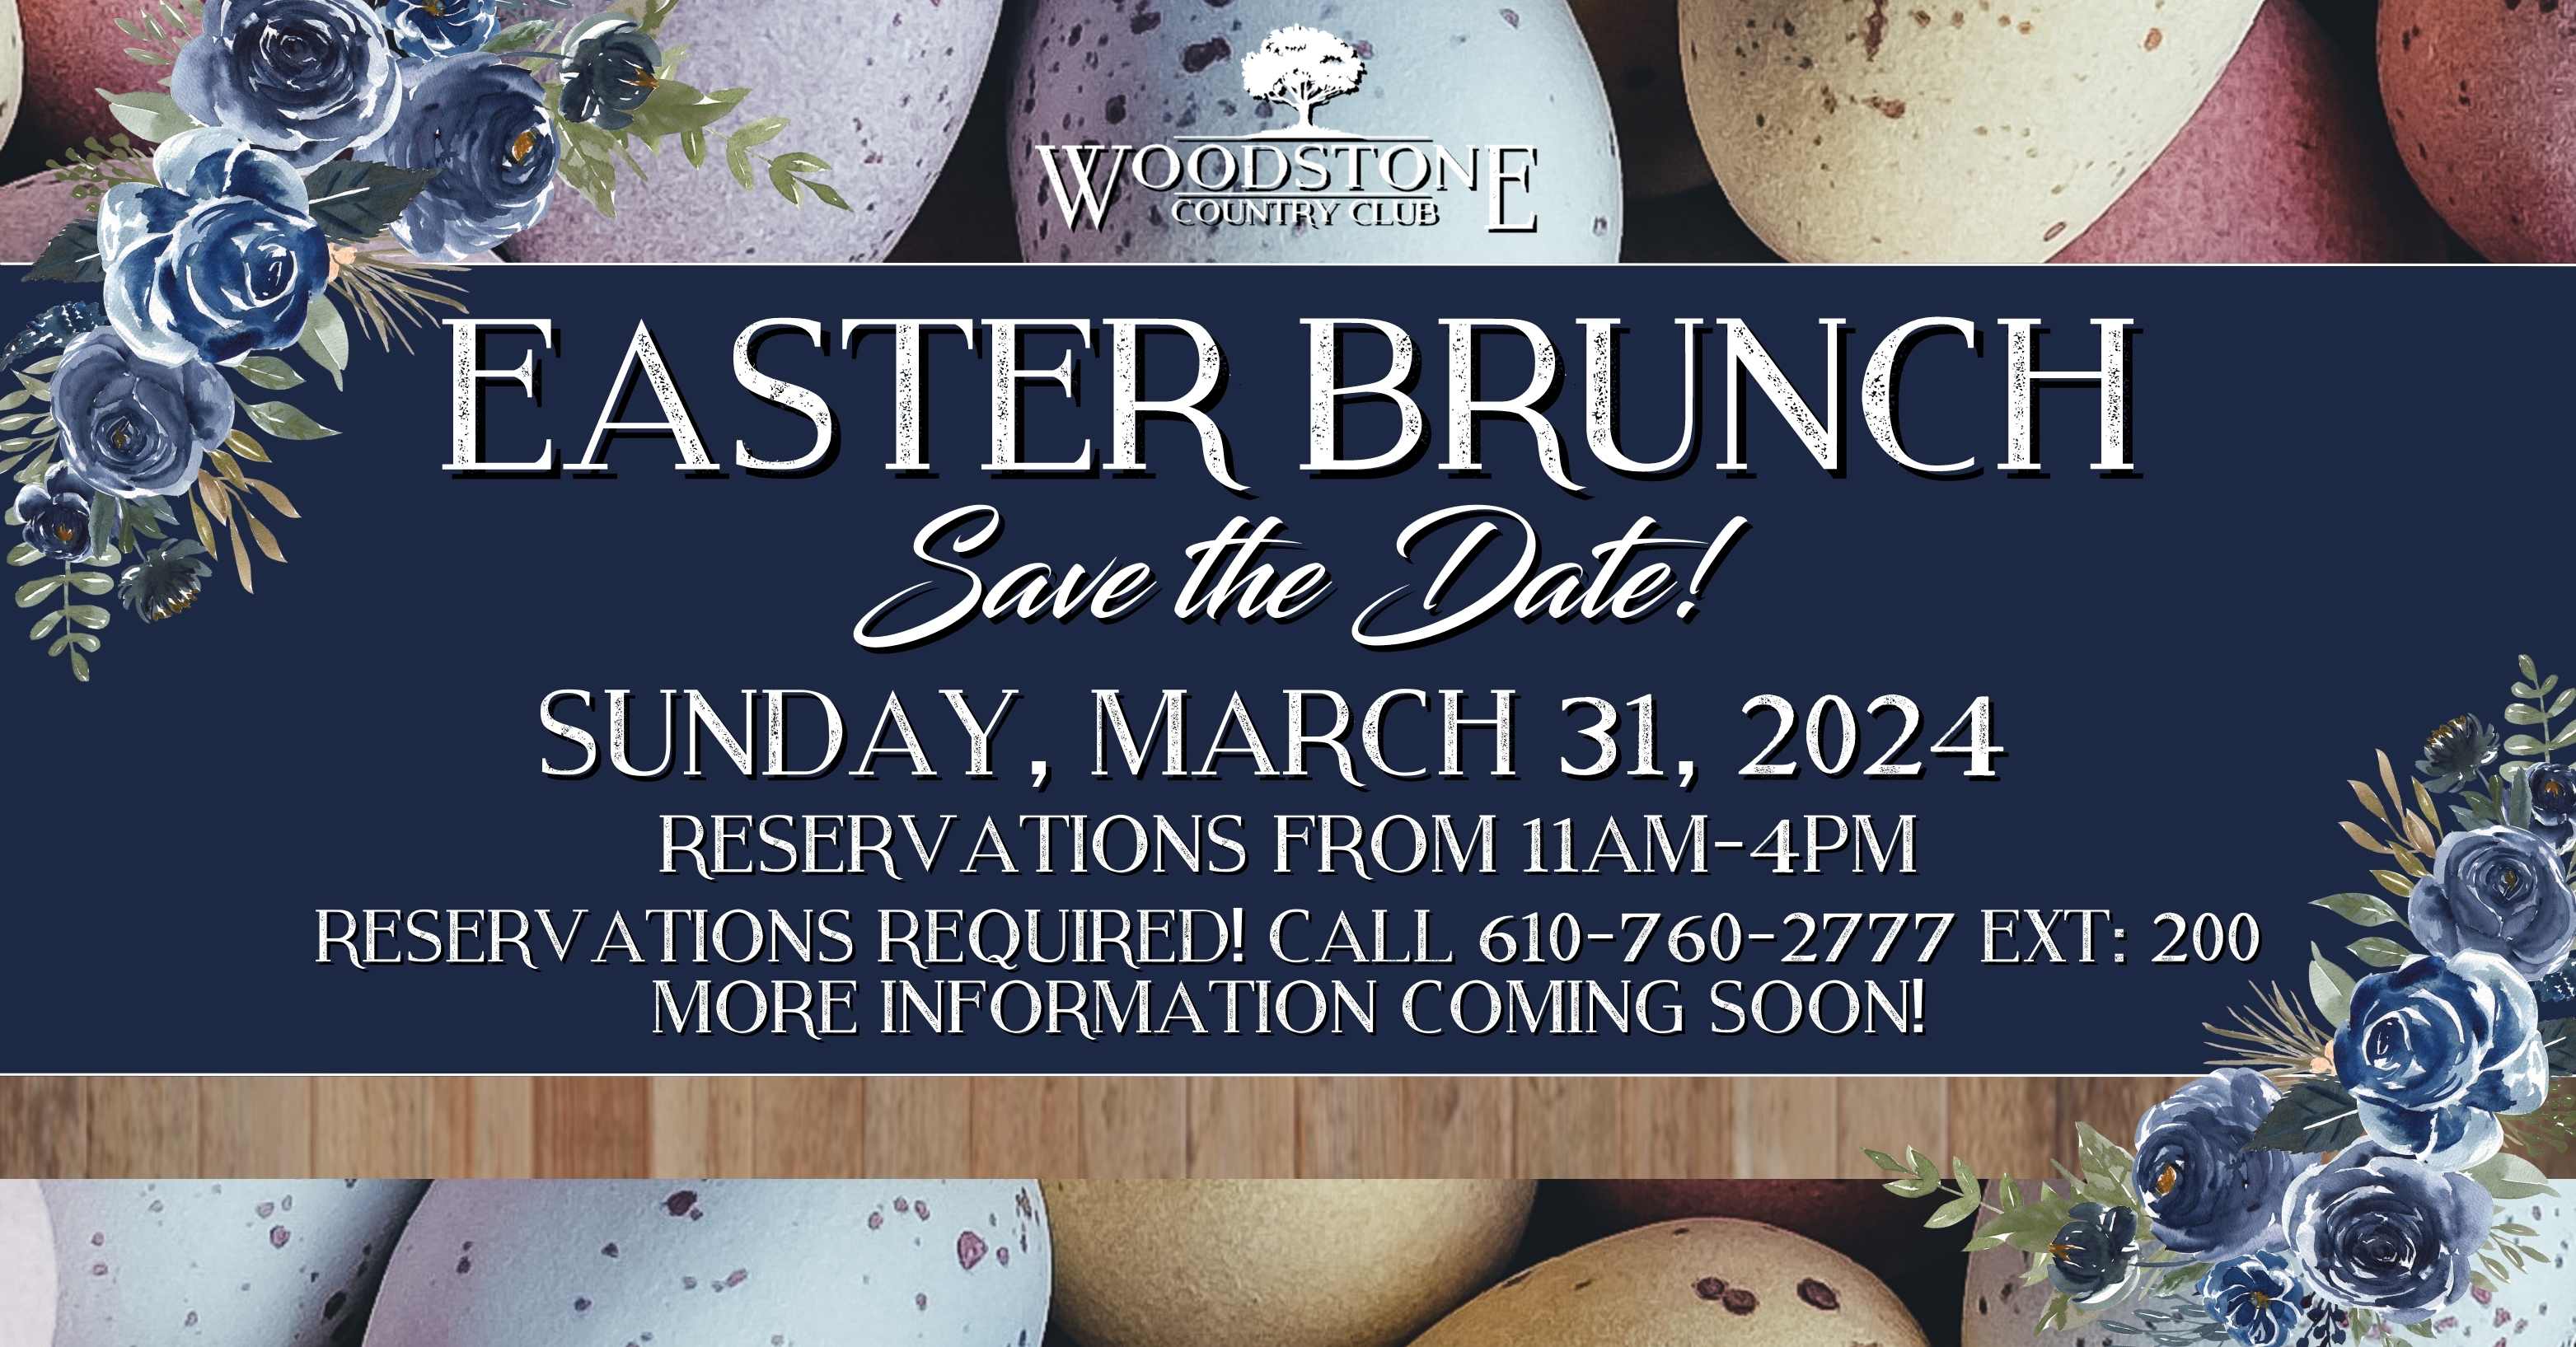 Easter Brunch Woodstone Country Club and Lodge